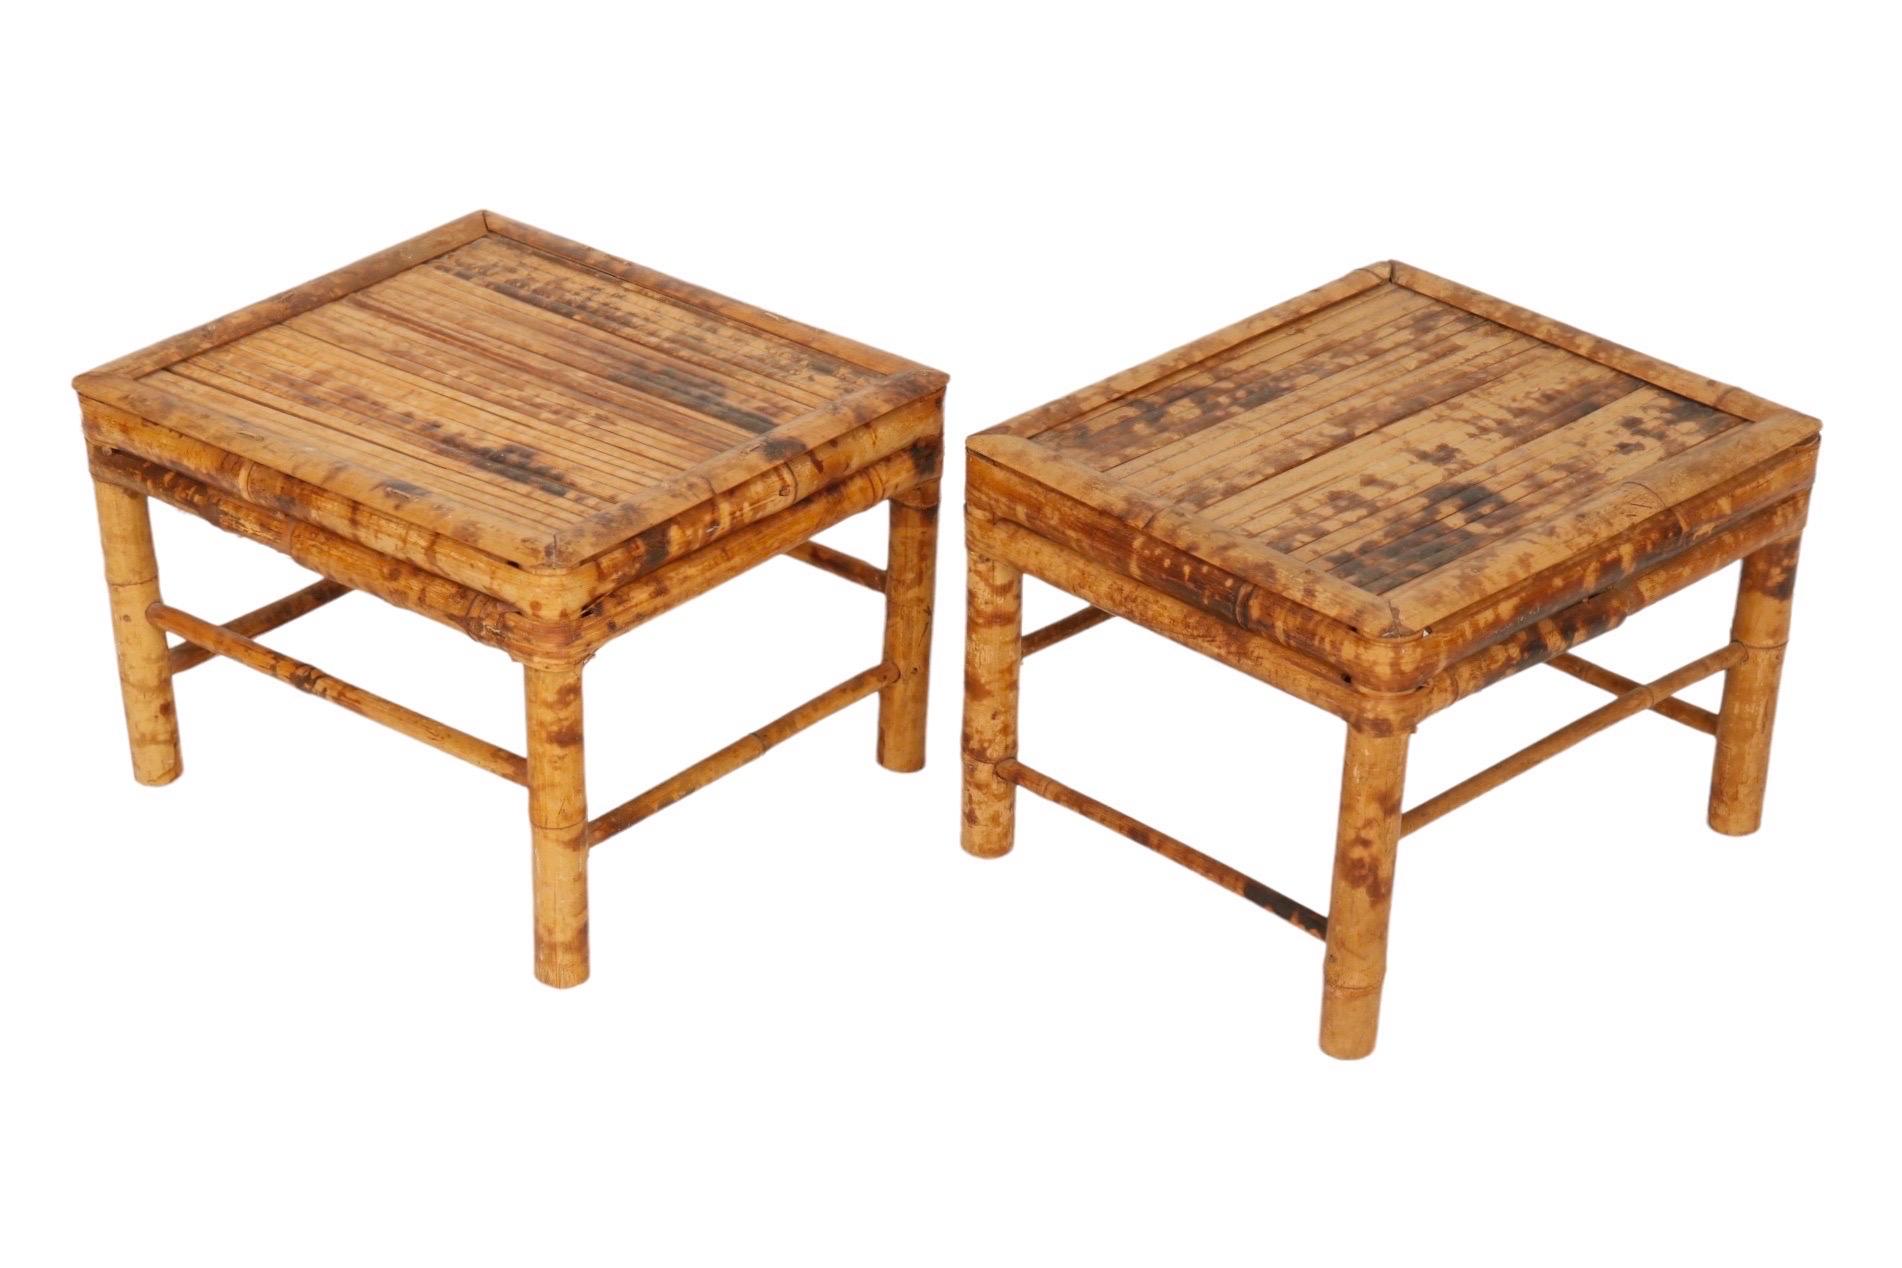 A pair of rectangular foot stools or plant stands made from burnt bamboo throughout which gives the look of exotic tortoise shell. The thick bamboo legs are supported with a pencil bamboo box stretcher. Dimensions per stool.
 